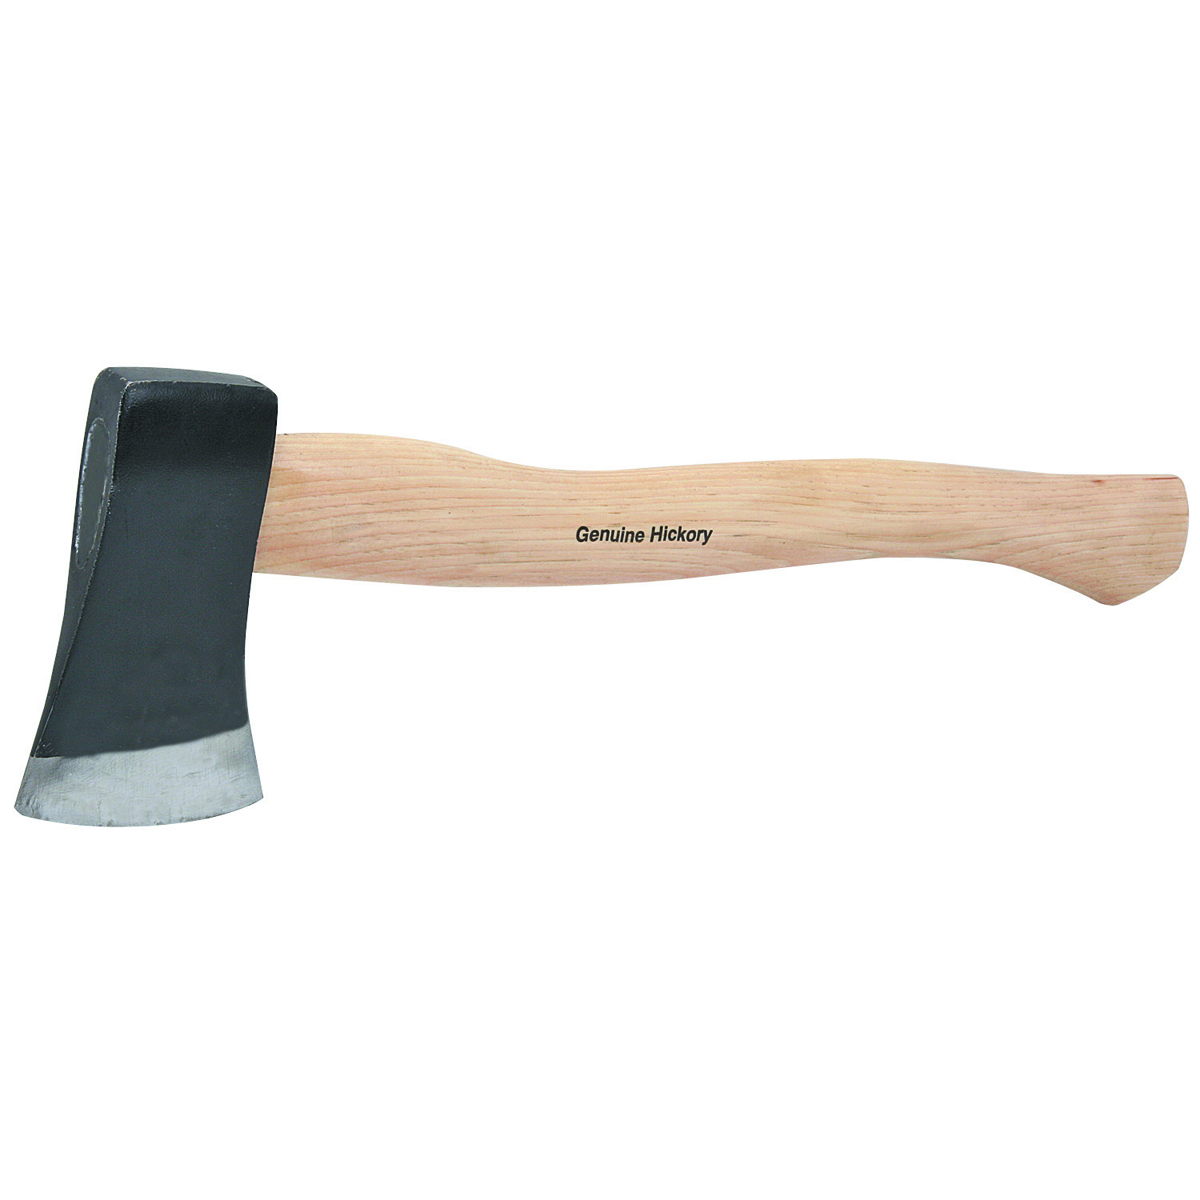 PITTSBURGH 1-1/4 lb. Hickory Axe - Item 65729 / 61174